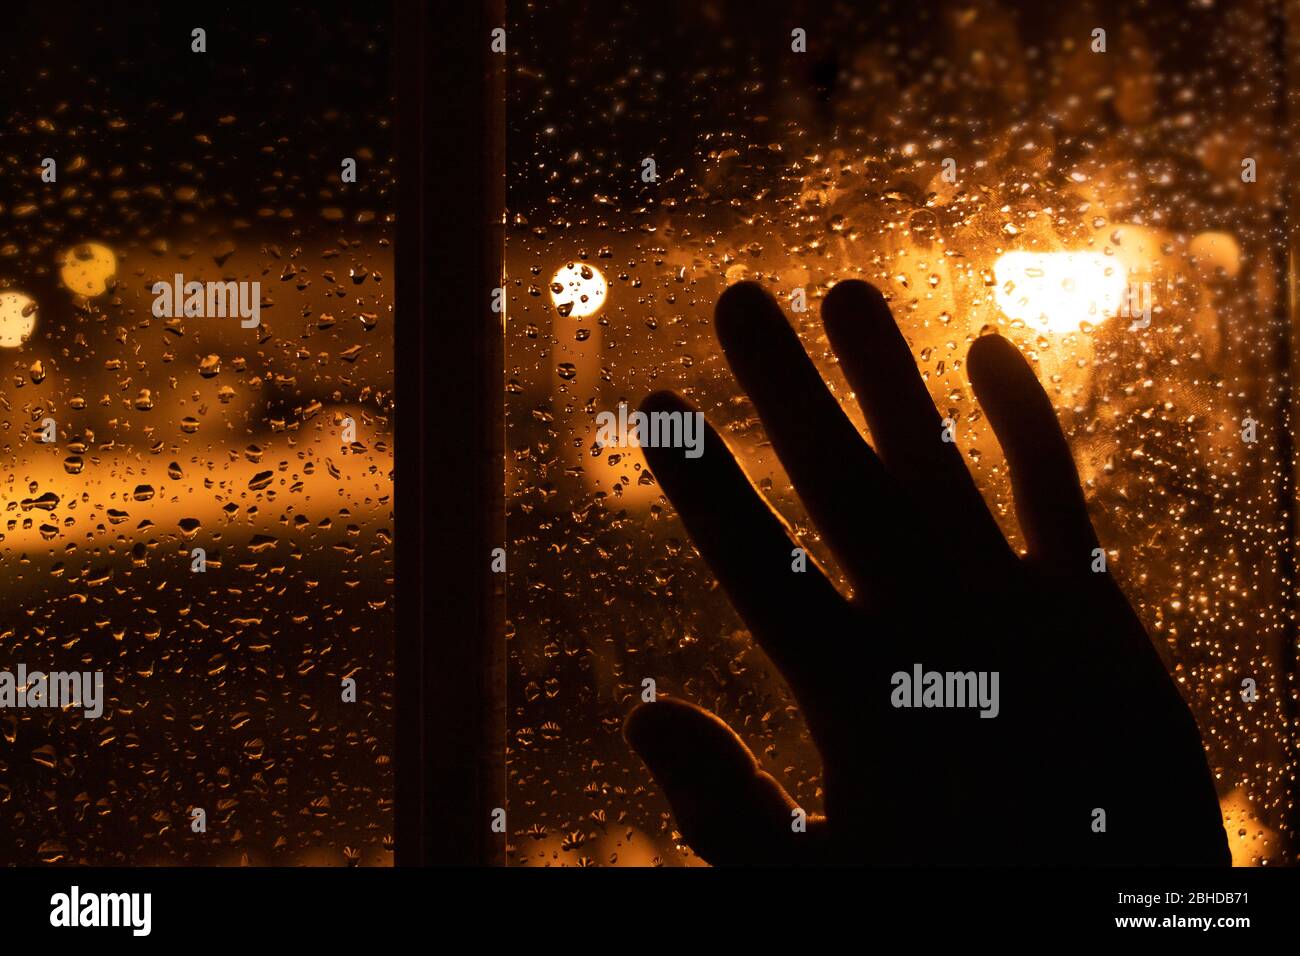 Silhouette of a hand leaning against the window on a rainy day at night. Sad image of melancholy looking out. Stock Photo